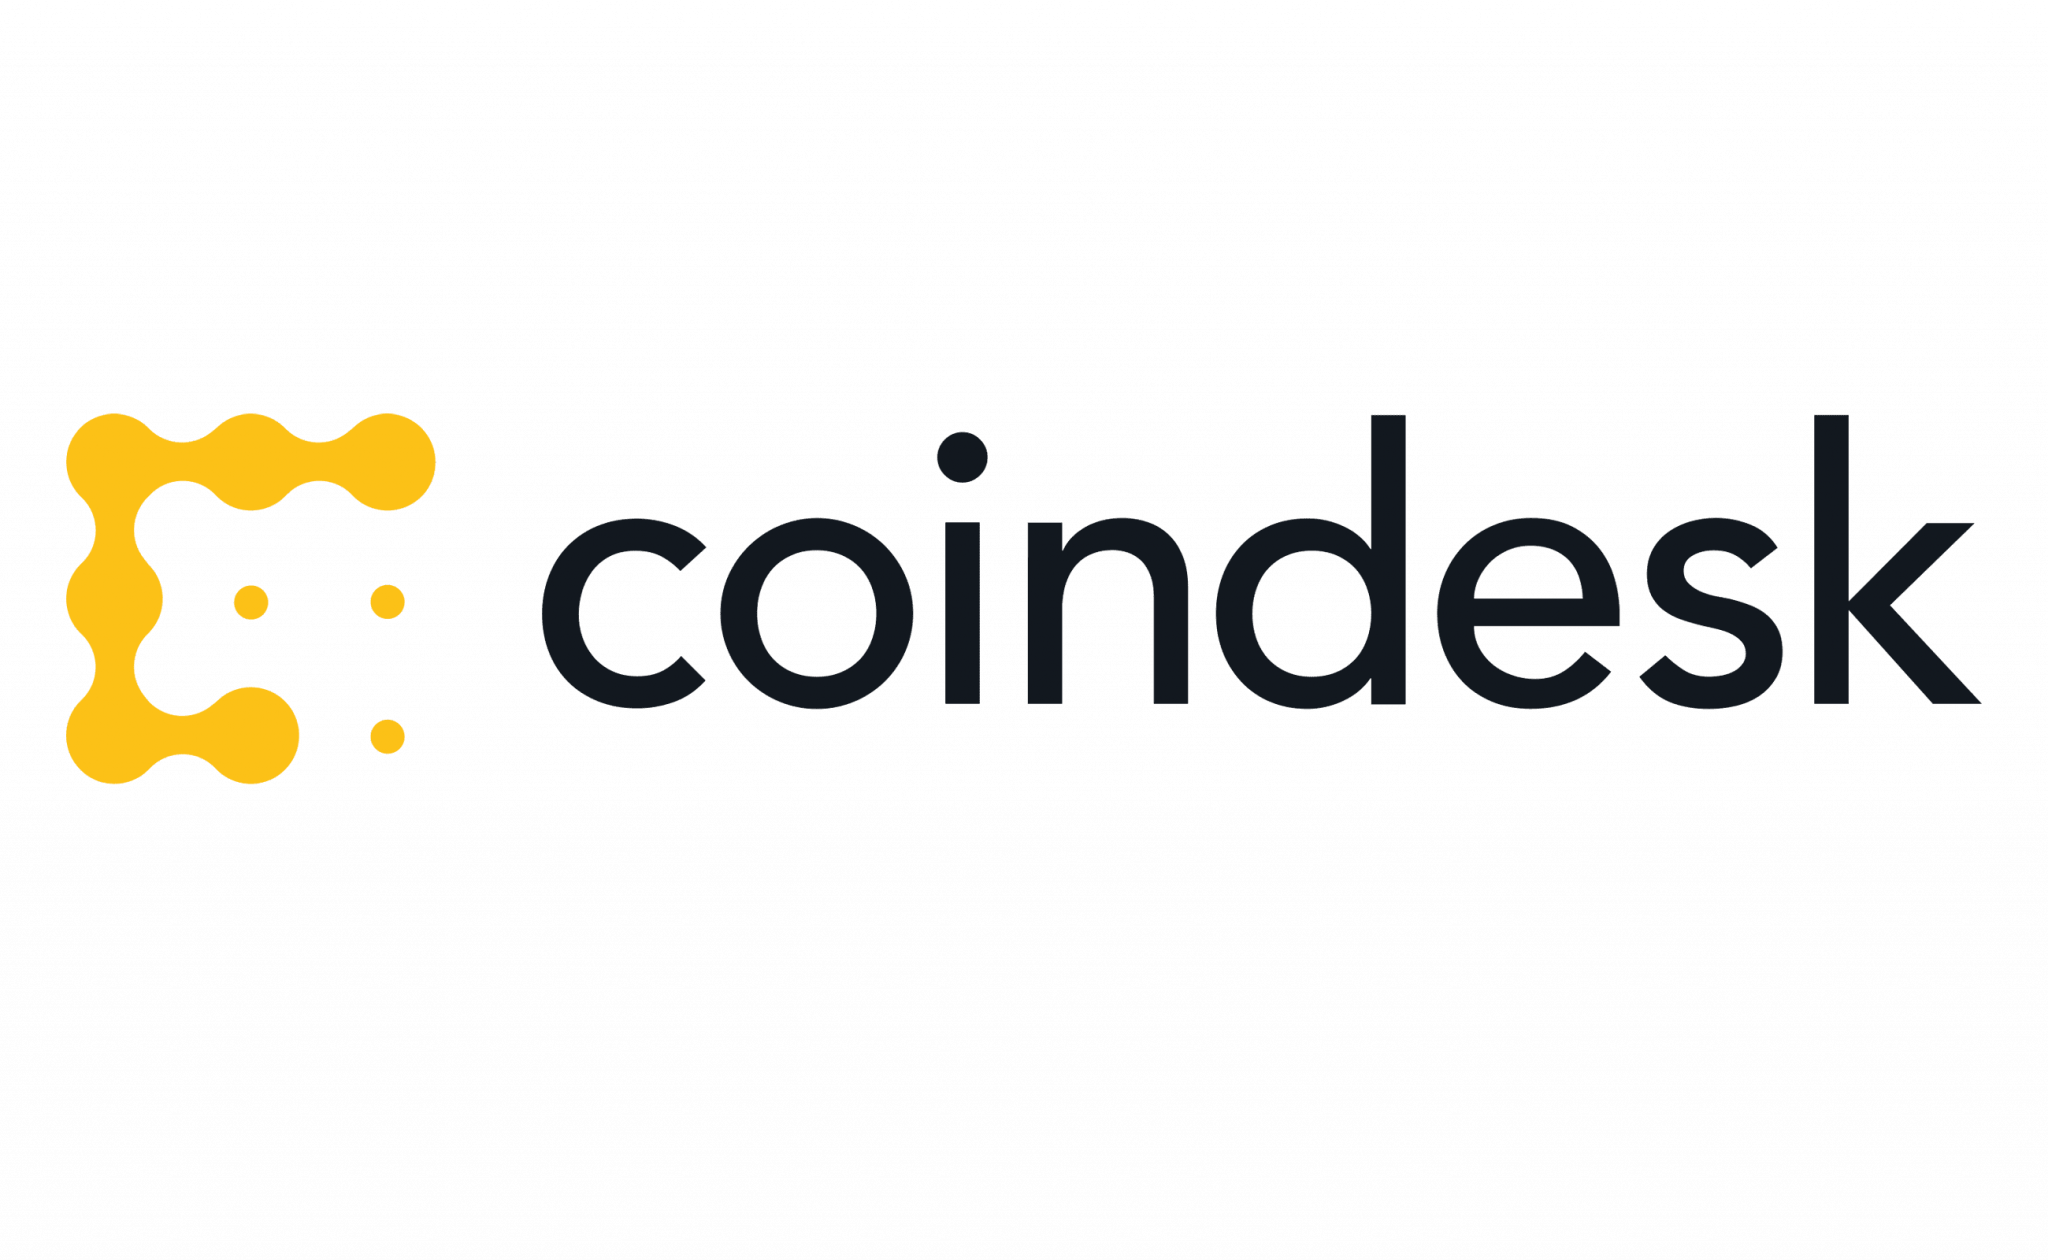 coindesk tv